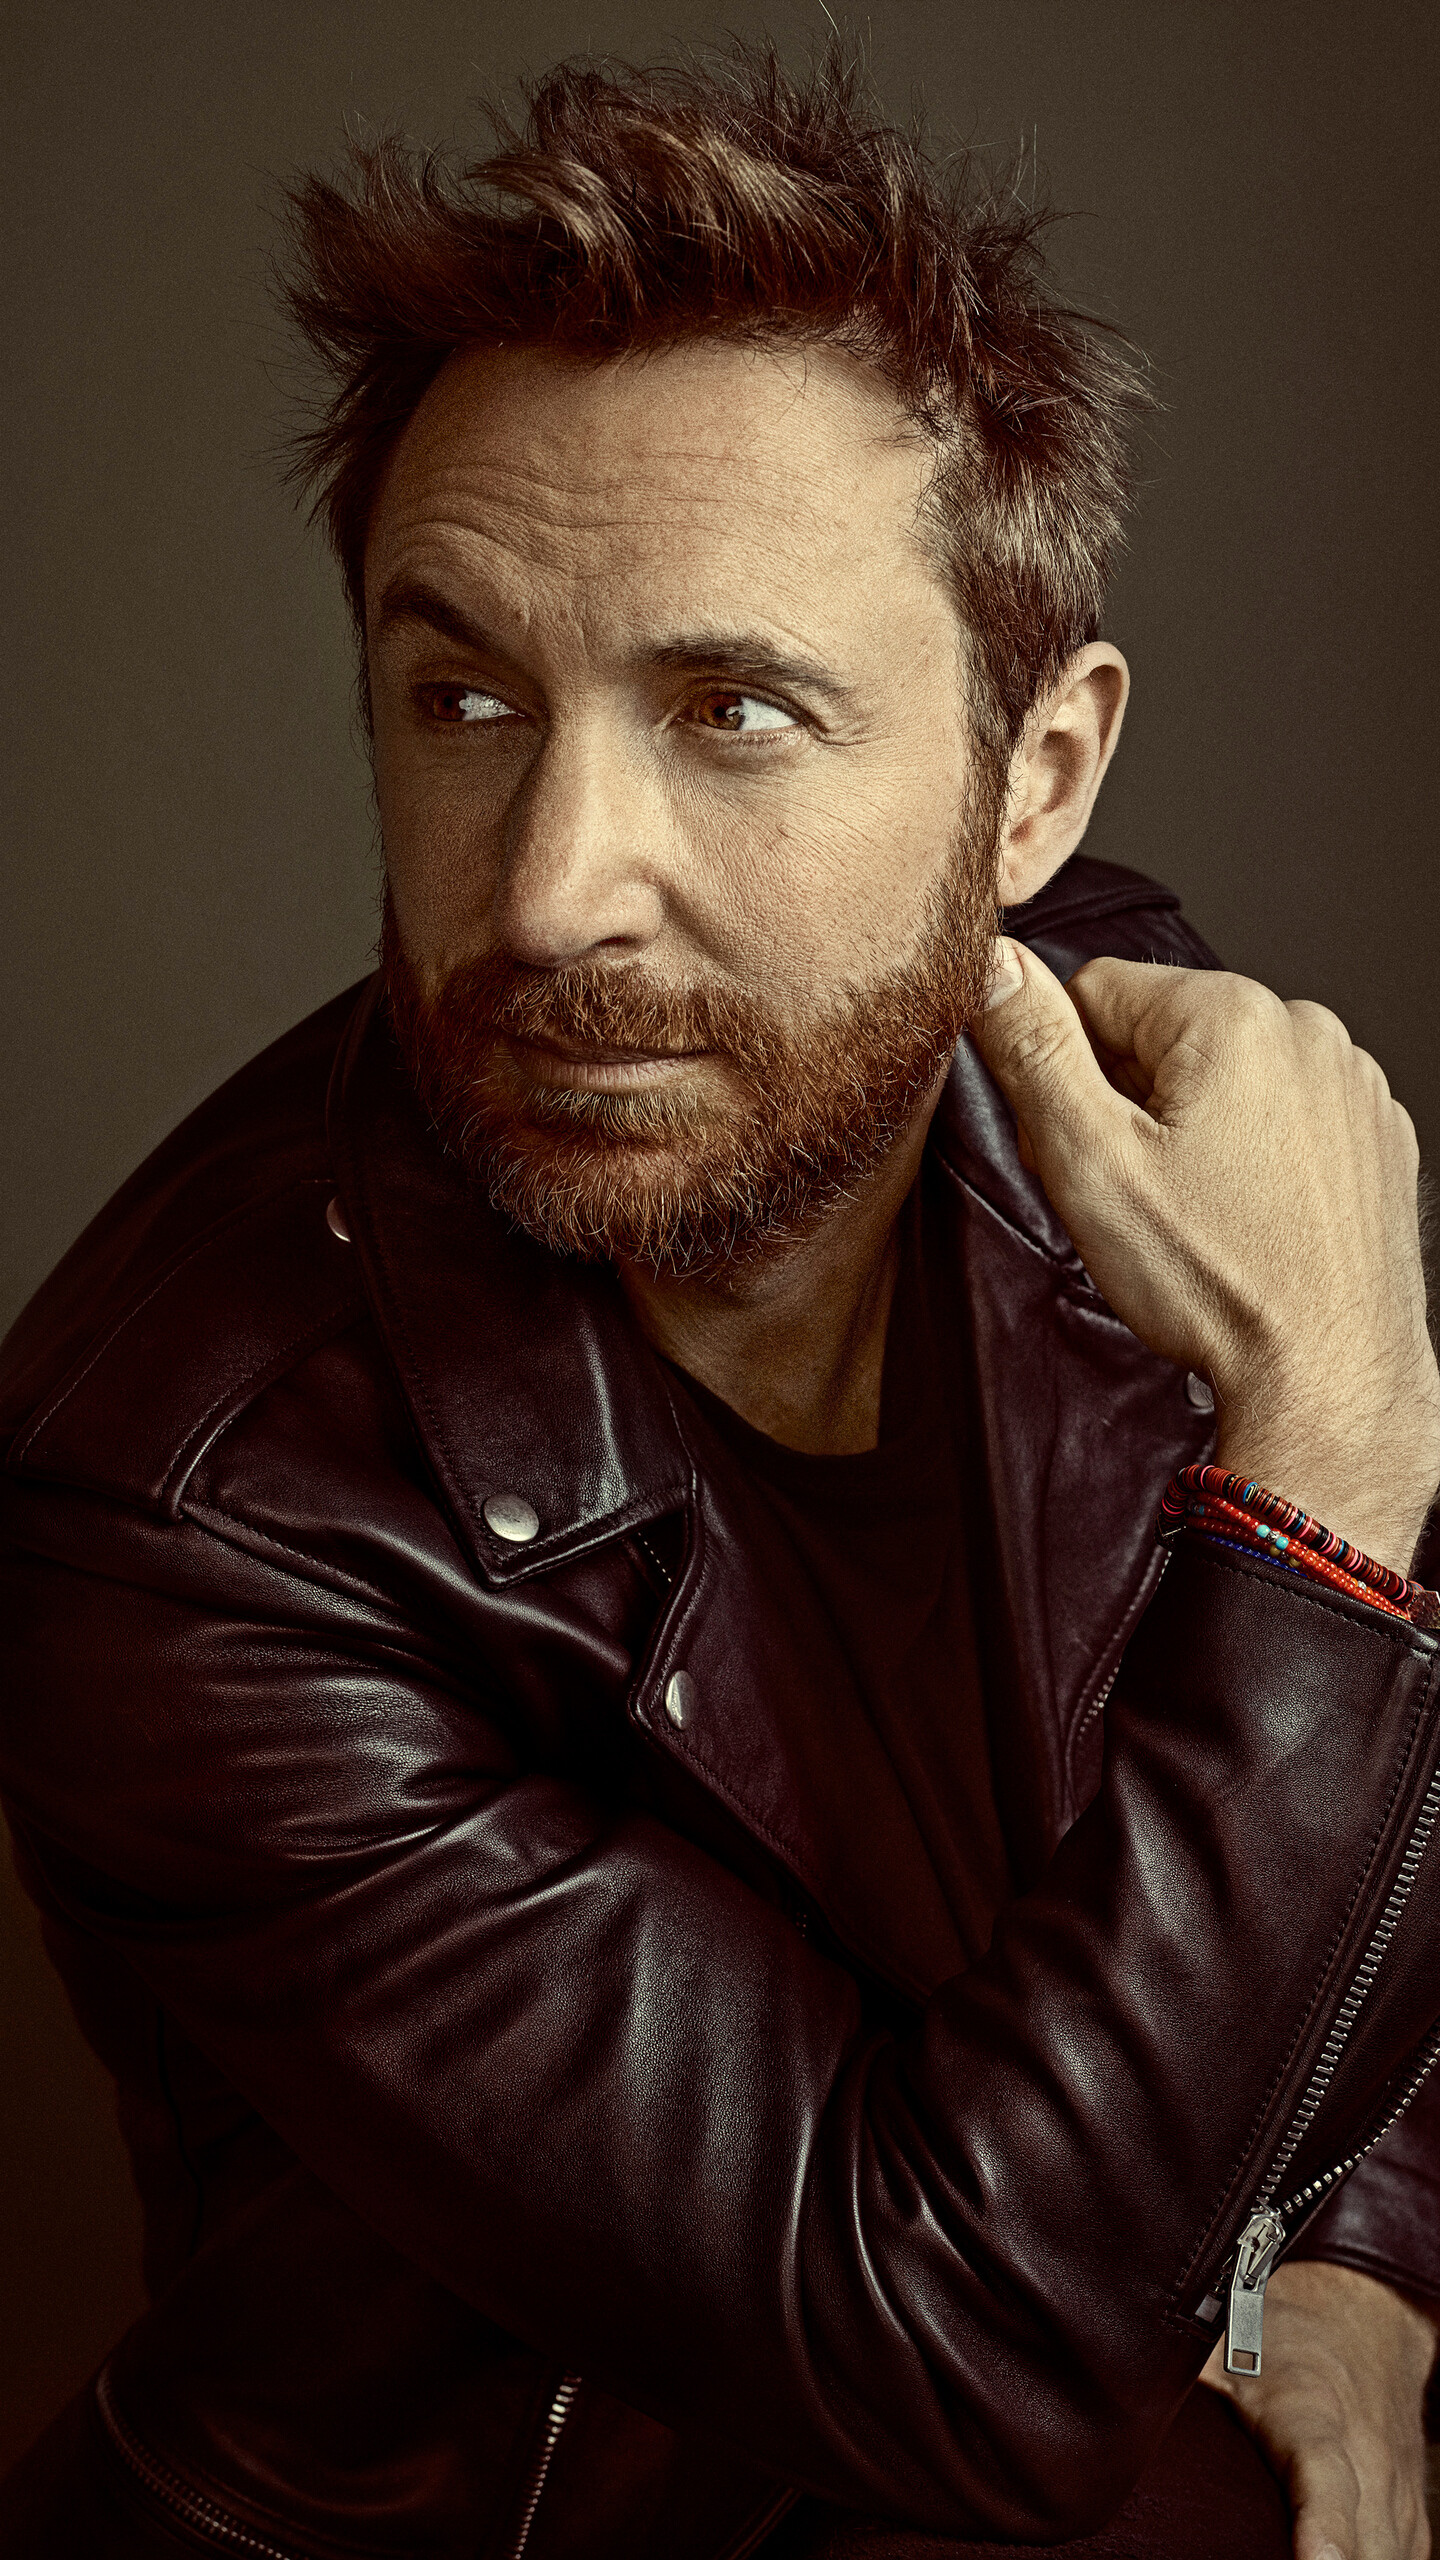 David Guetta: 2009 album One Love, included the hit singles "When Love Takes Over", "Gettin' Over You", "Sexy Bitch". 1440x2560 HD Wallpaper.